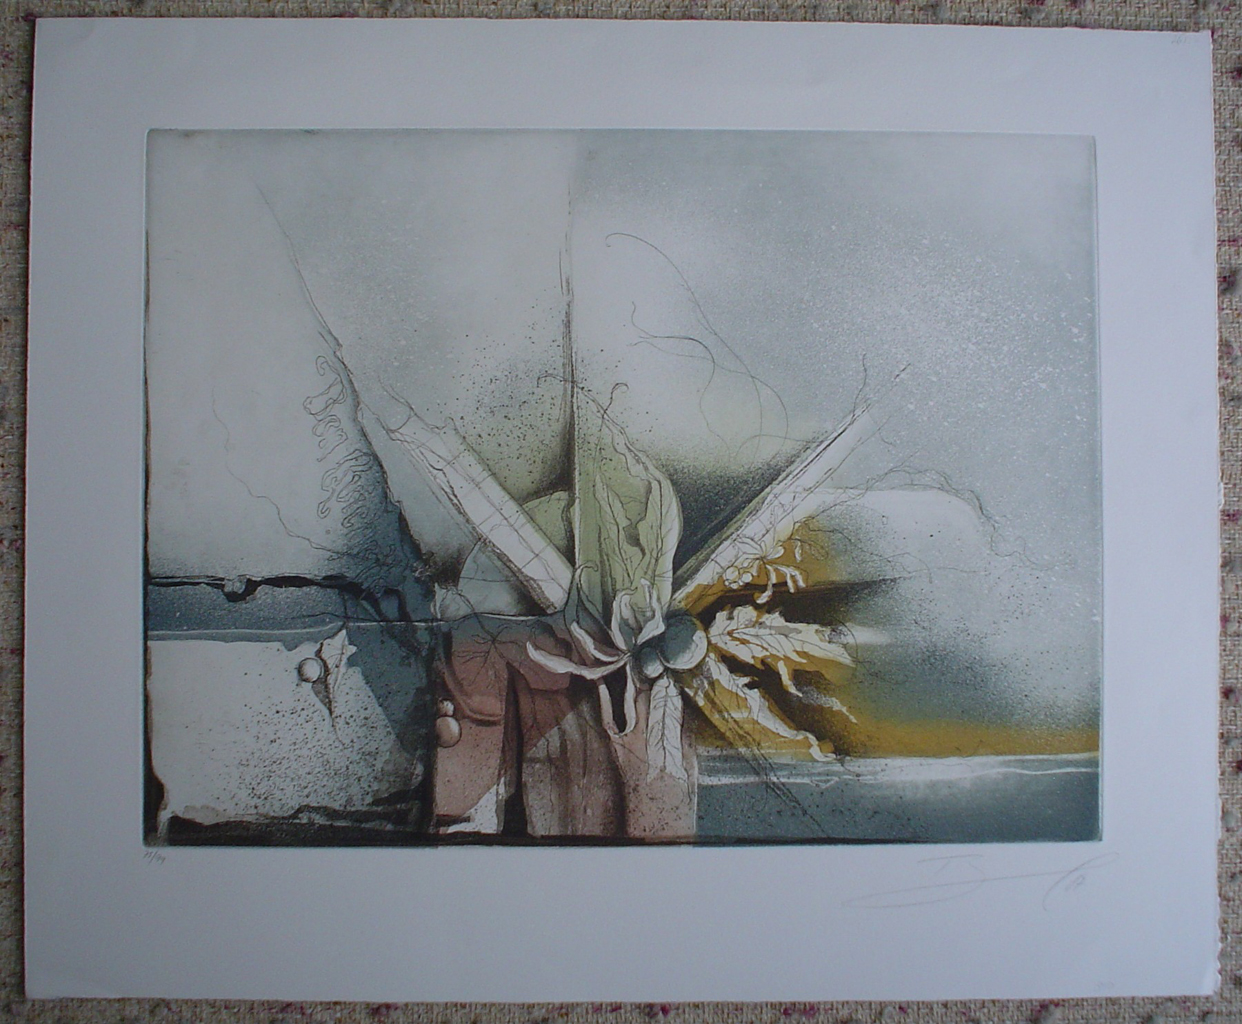 Blue Flower Autumn Colours by Ruediger Brassel, shown with full margins - original etching, signed and numbered 75/ 99